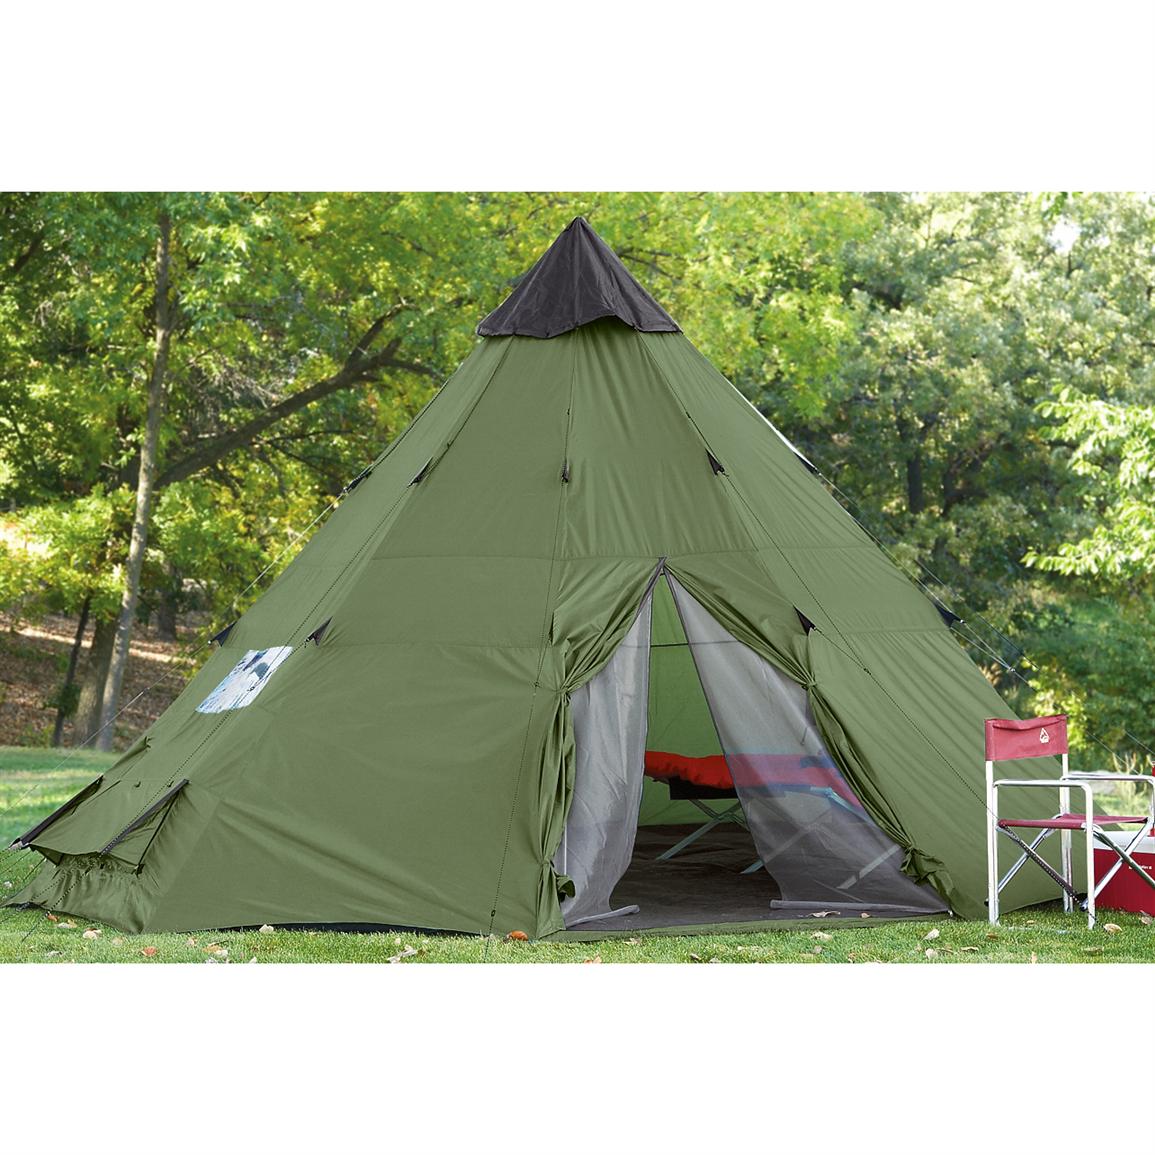  Tent 1839; x 1839;  175419, Outfitter amp; Canvas Tents at Sportsma